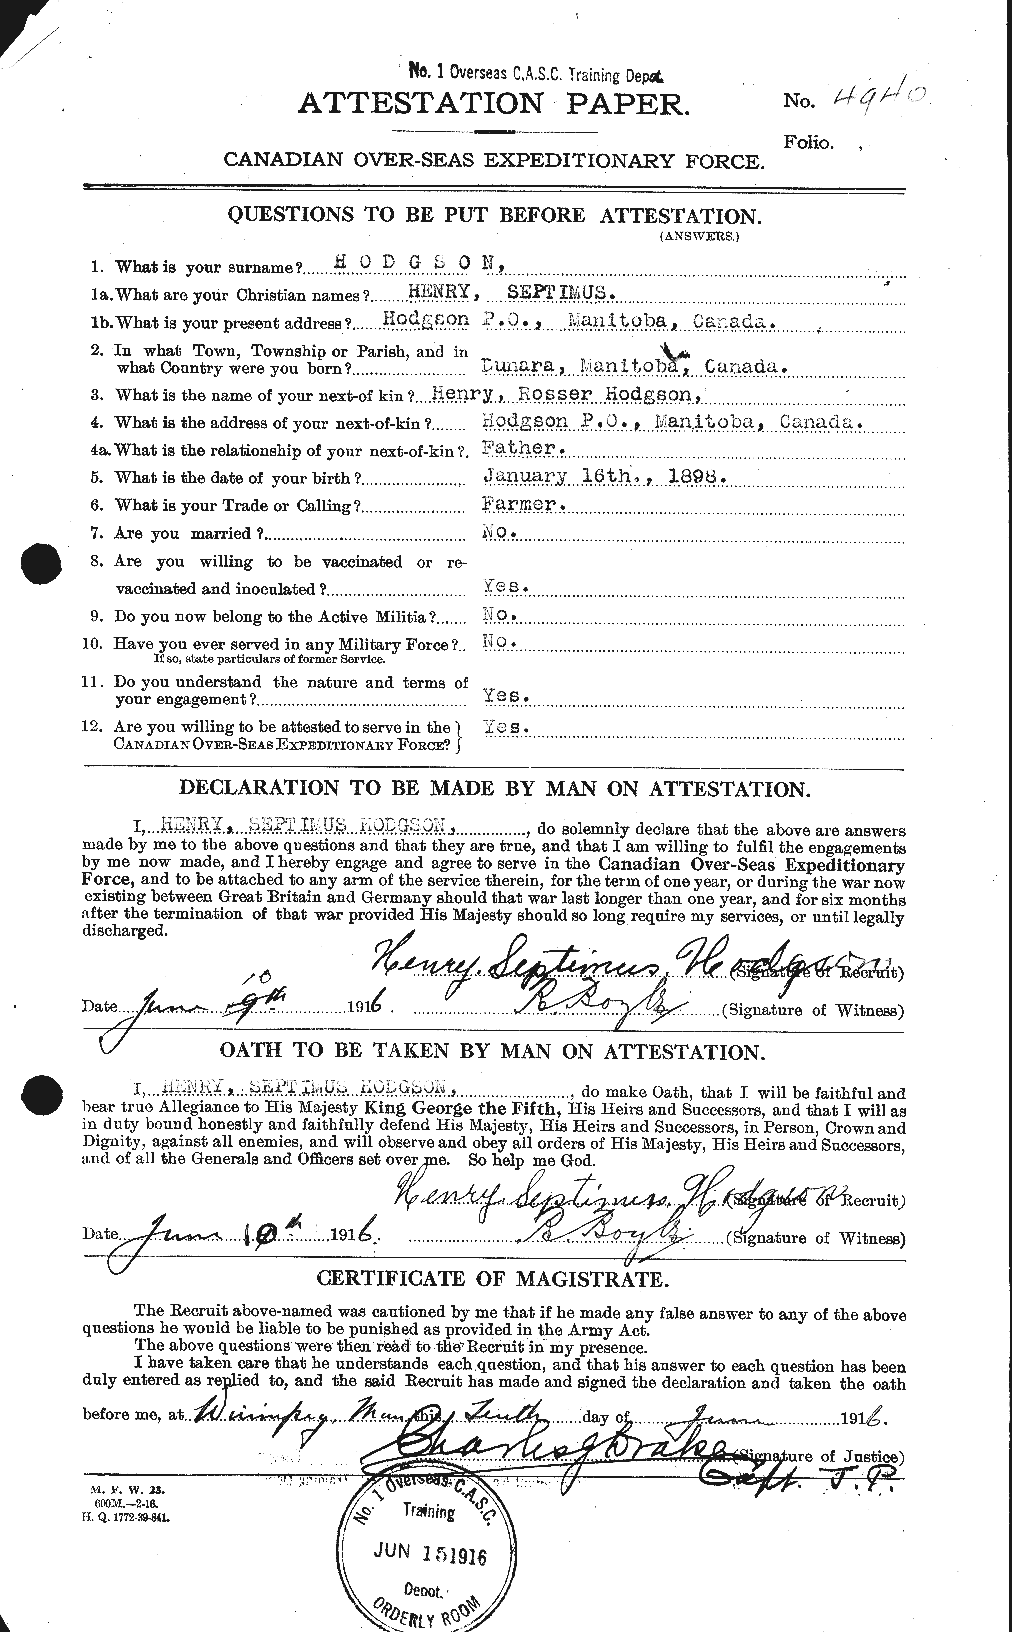 Personnel Records of the First World War - CEF 395456a